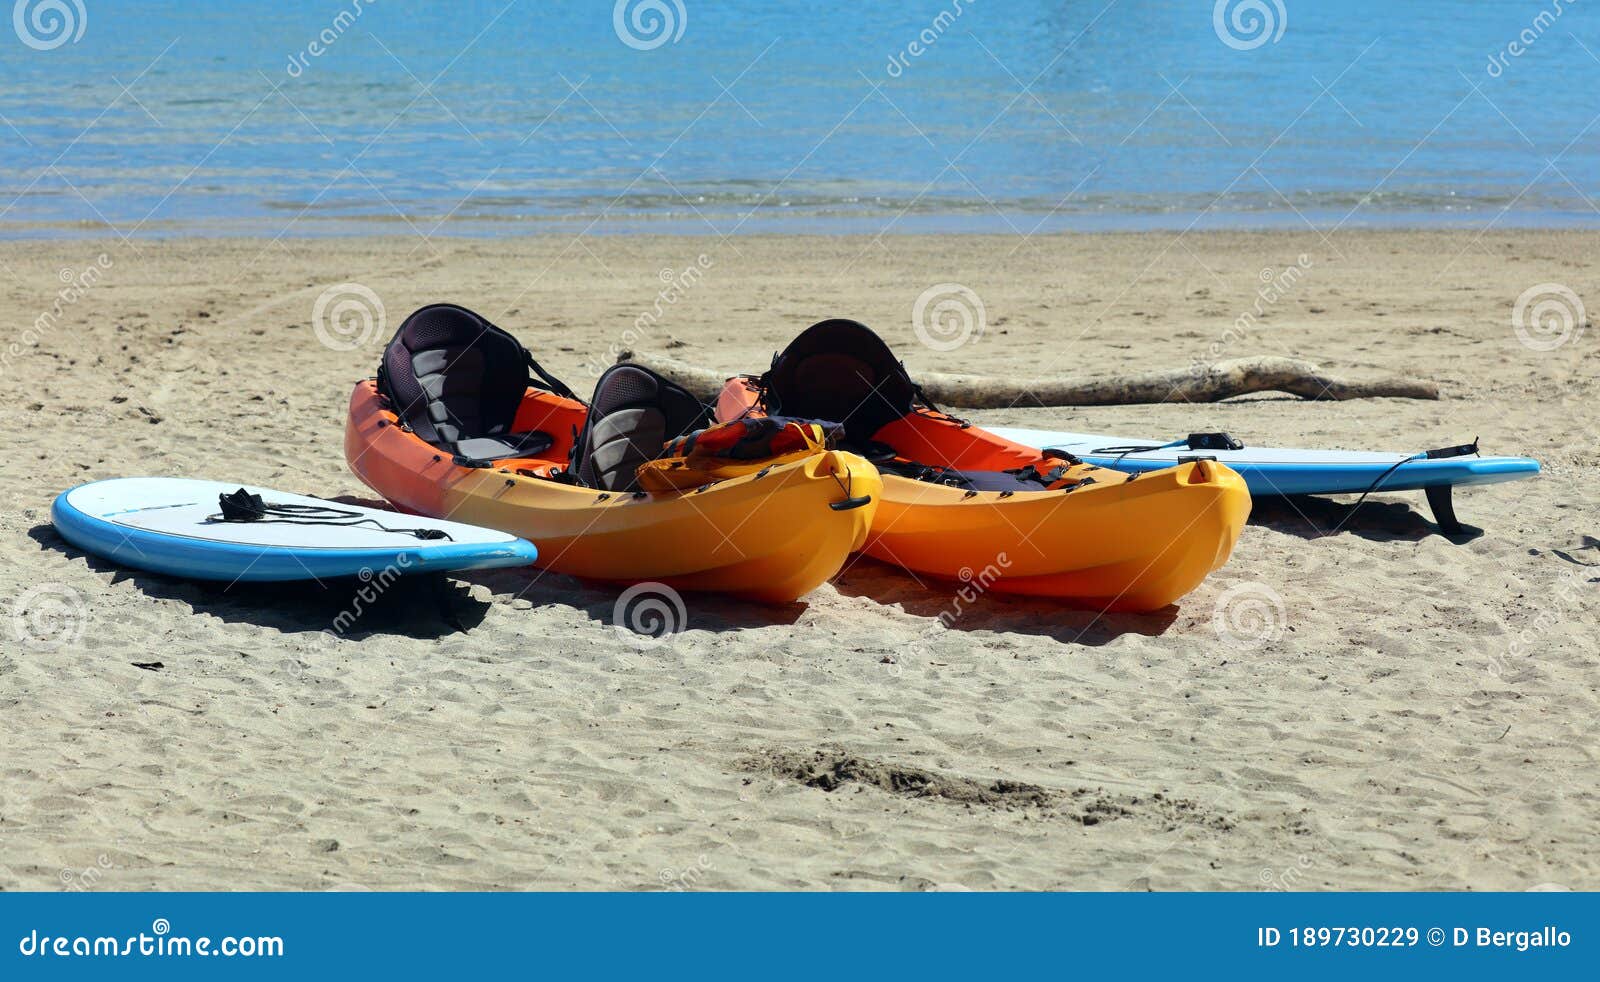 kayak and surf boards watersports at beach in costa rica